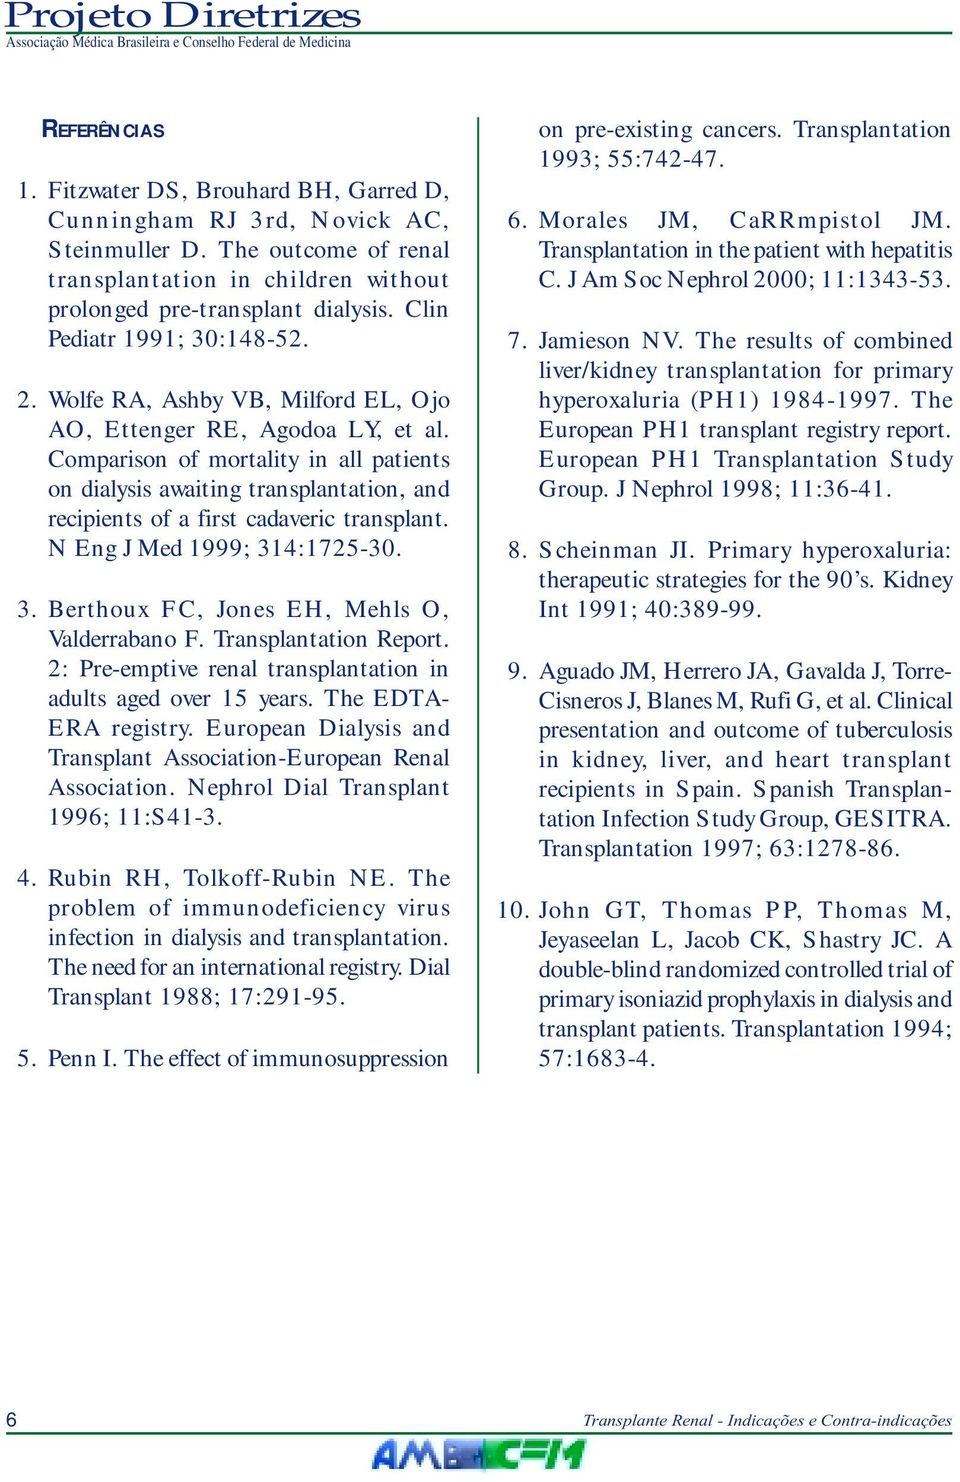 Comparison of mortality in all patients on dialysis awaiting transplantation, and recipients of a first cadaveric transplant. N Eng J Med 1999; 314:1725-30. 3. Berthoux FC, Jones EH, Mehls O, Valderrabano F.